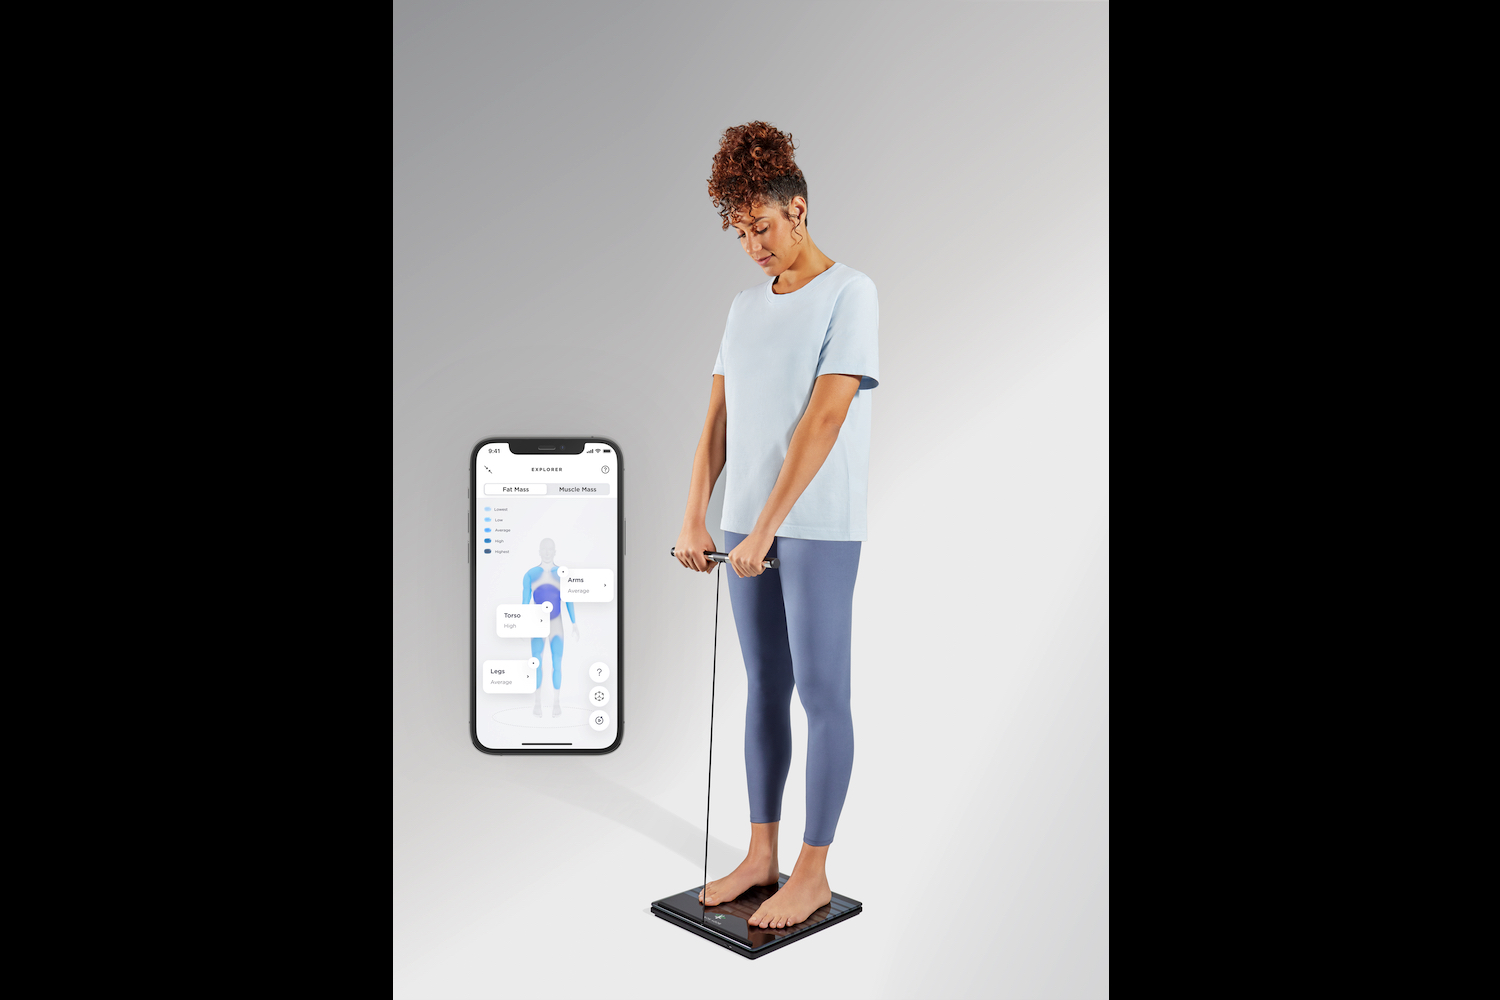 https://www.digitaltrends.com/wp-content/uploads/2022/01/withings-body-scan-handle.jpg?fit=1500%2C1000&p=1